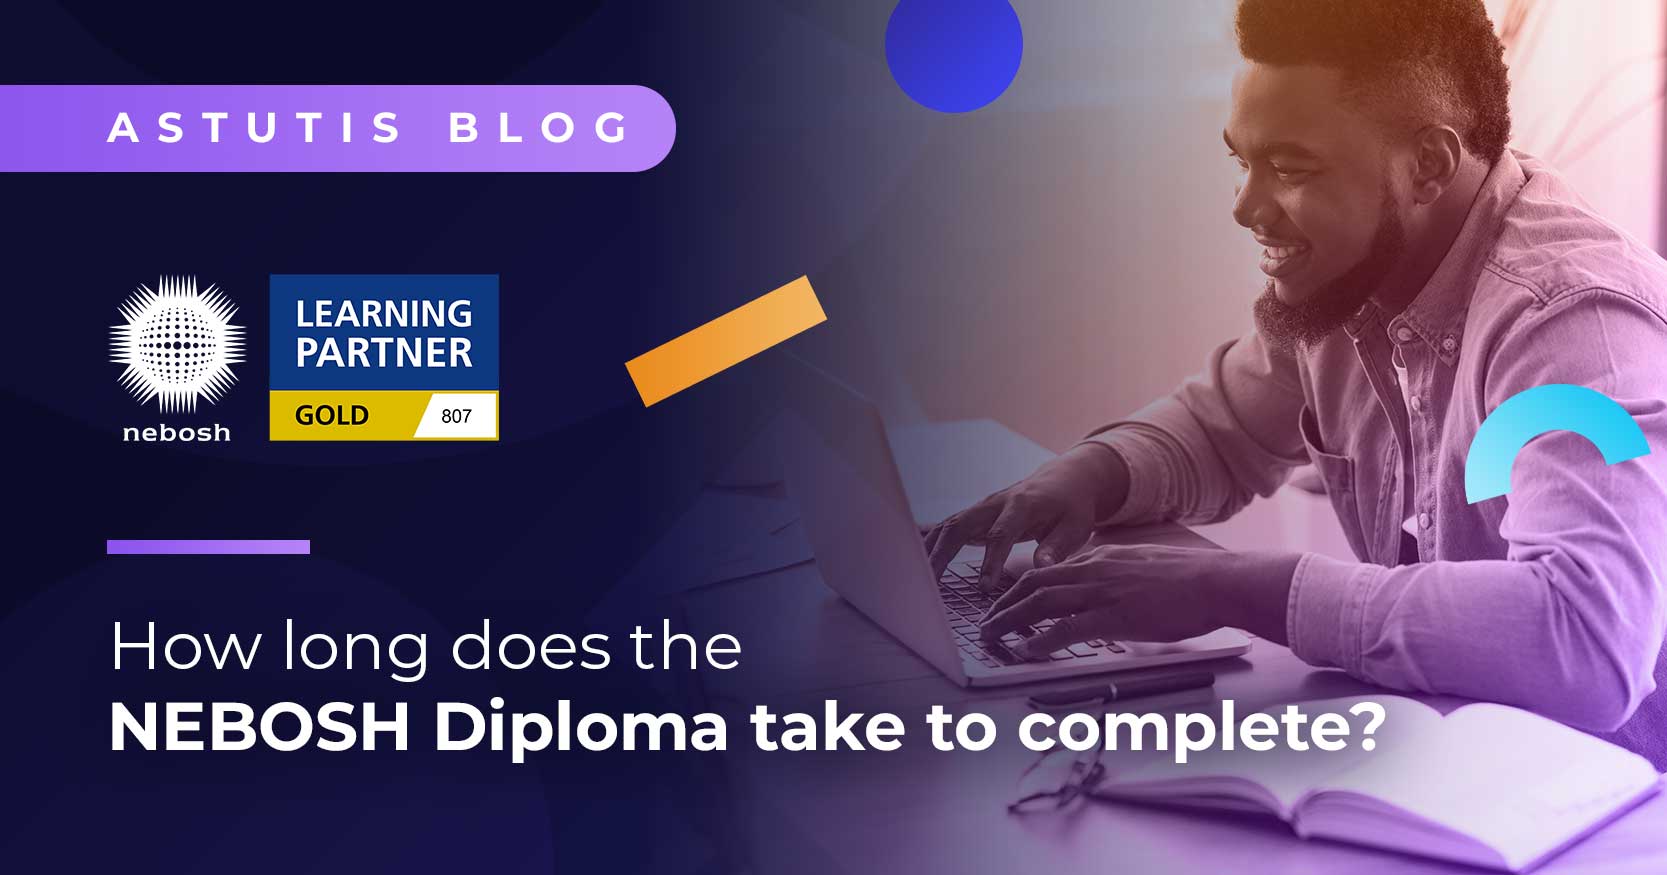 How Long Does the NEBOSH Diploma Take to Complete? Image